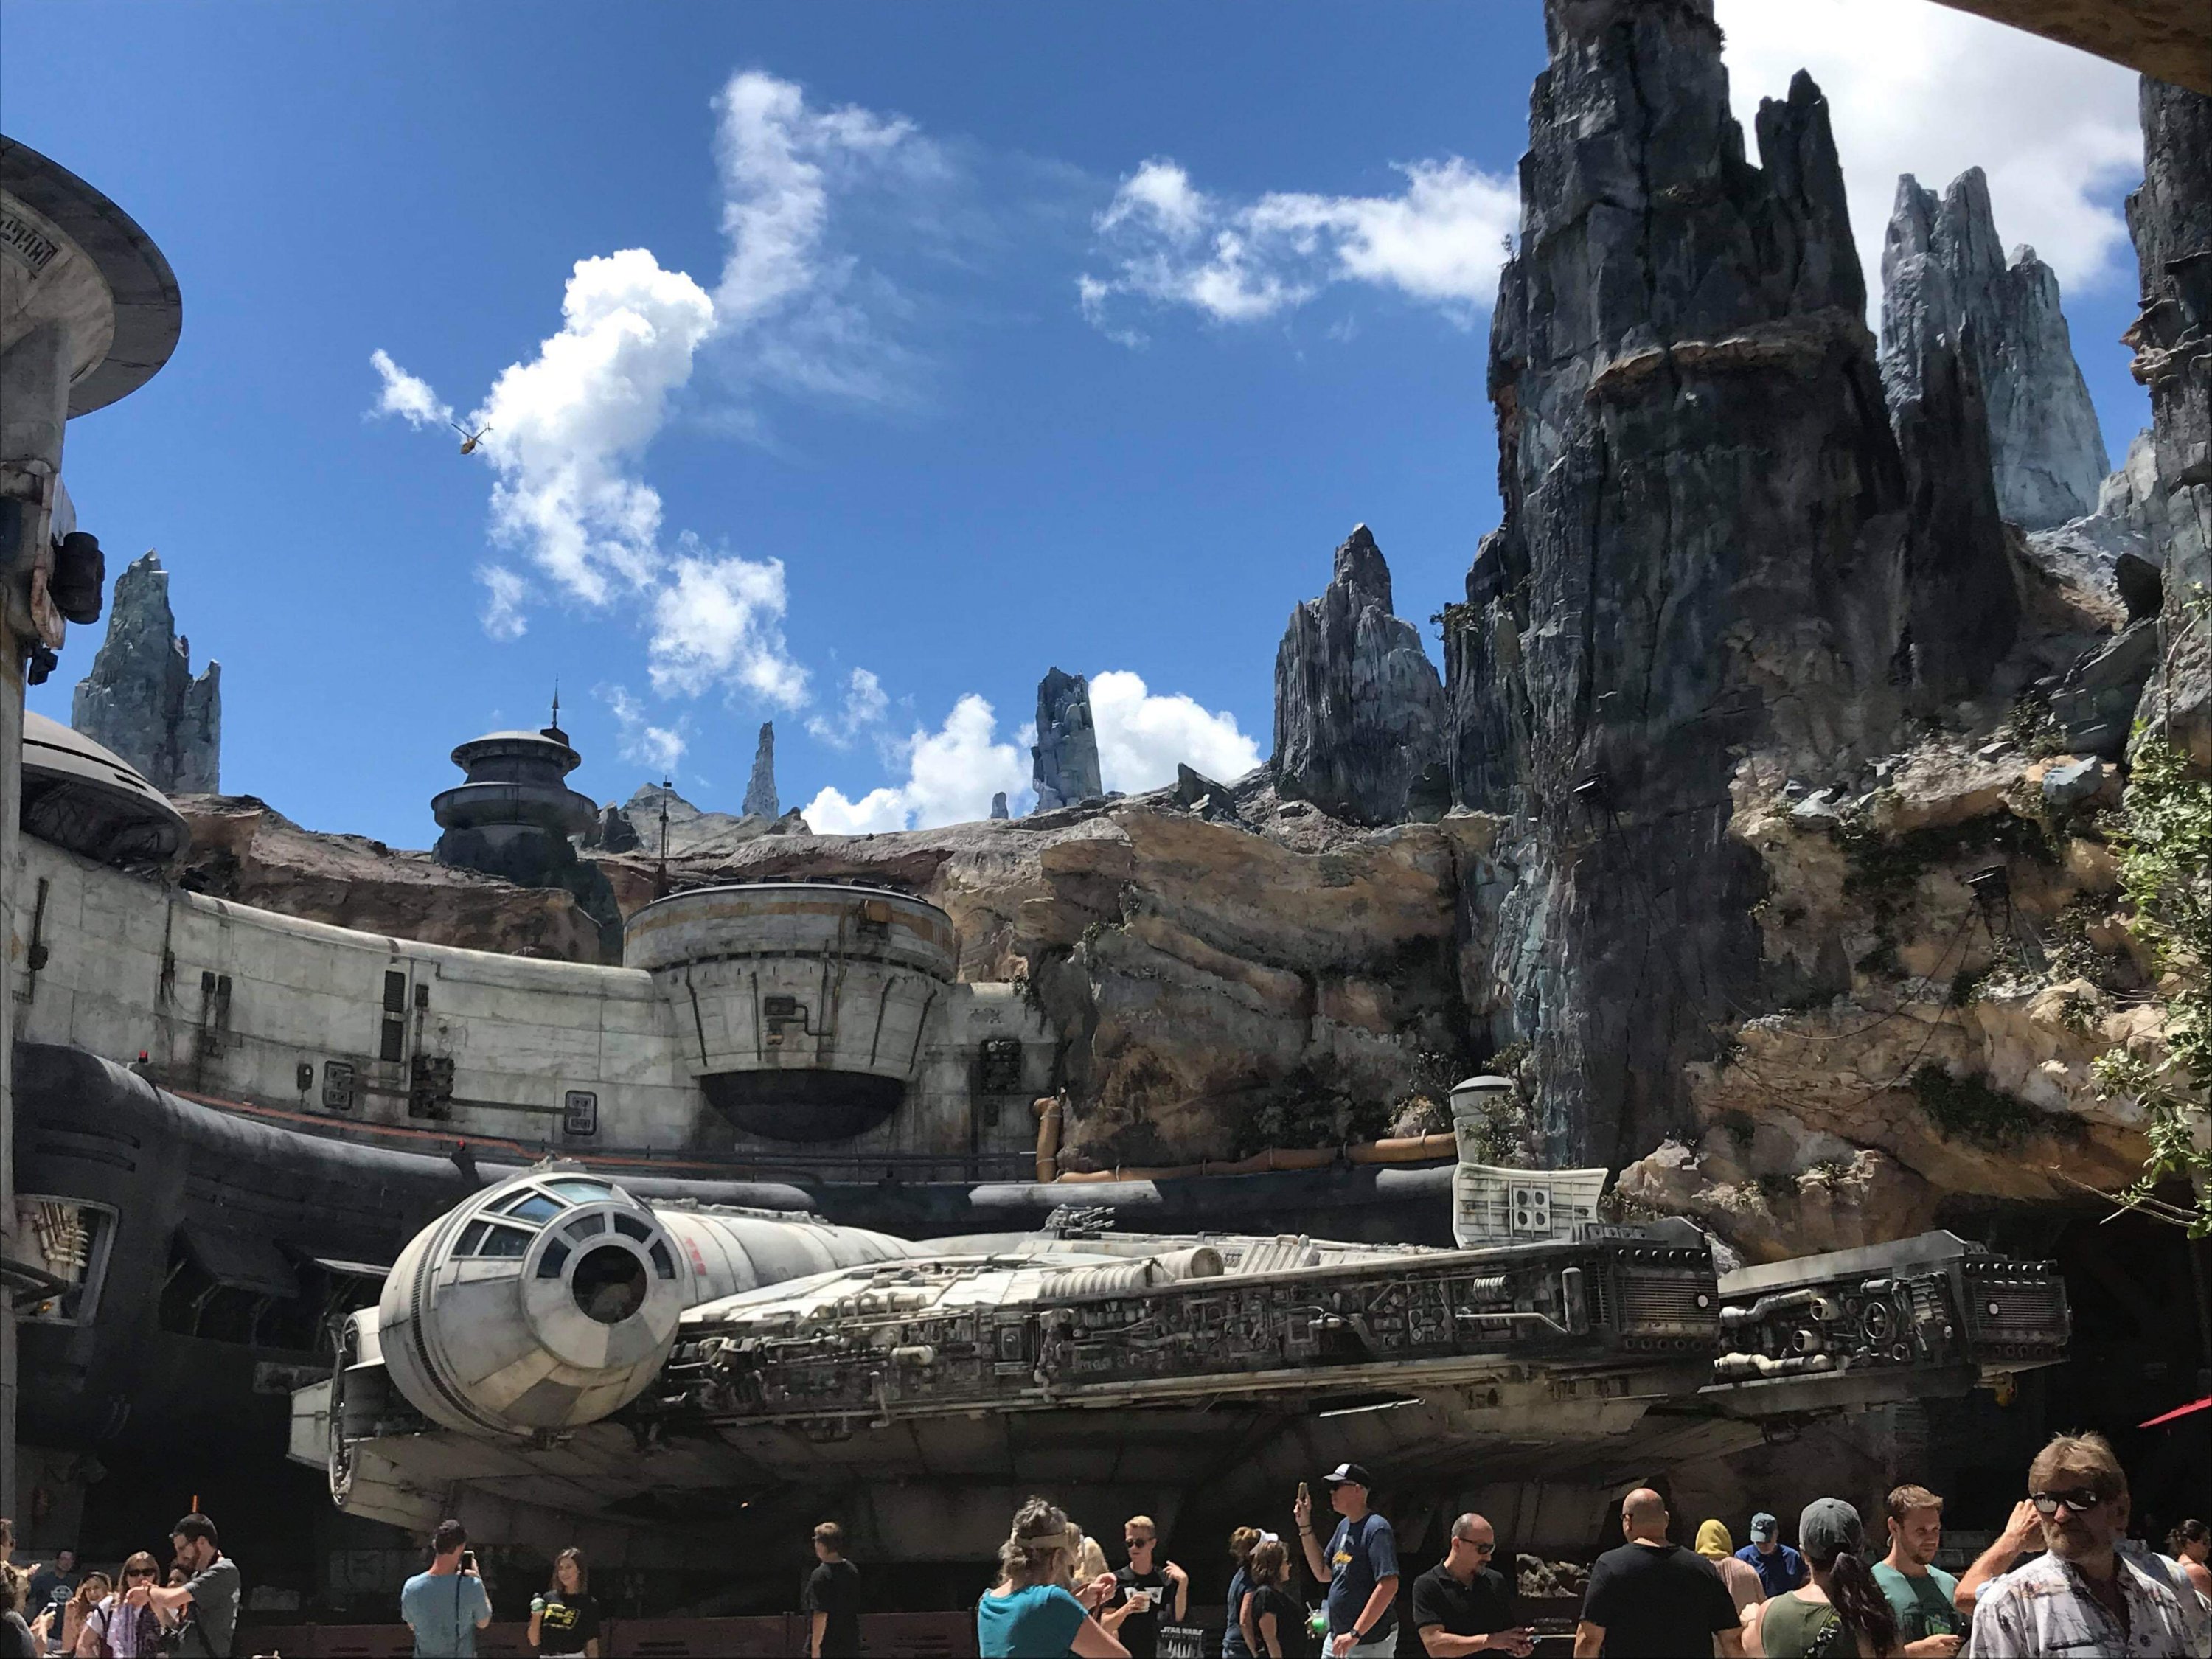 First Look at Star Wars Galaxy’s Edge in Hollywood Studios